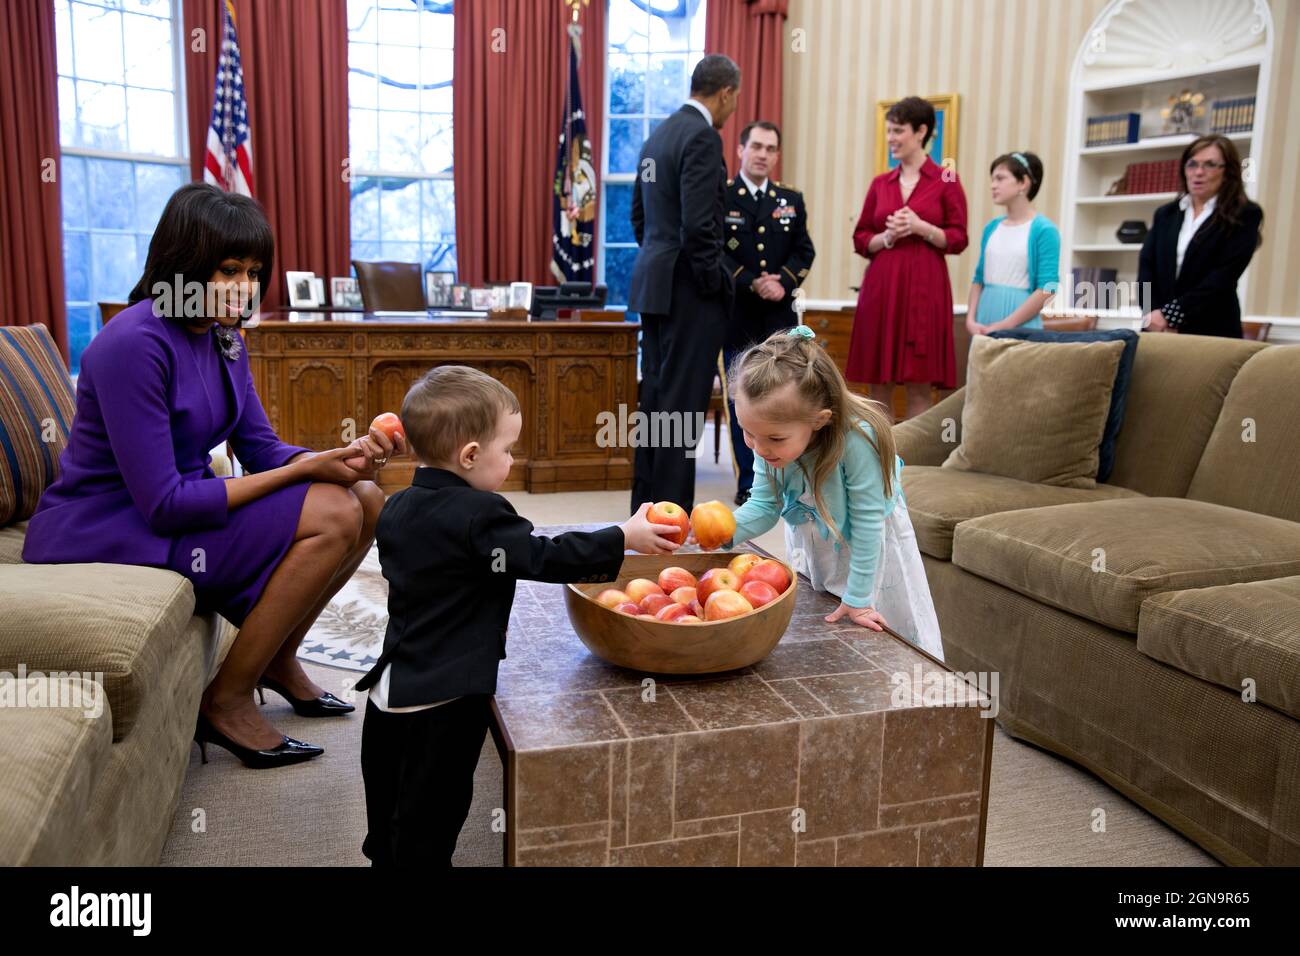 President Barack Obama and First Lady Michelle Obama visit with former Staff Sergeant Clinton Romesha and his family in the Oval Office prior to a ceremony to award Romesha the Medal of Honor, Feb. 11, 2013.  Remesha's family members, from left, are: son Colin Romesha, 2; daughter Gwen Romesha, 4;  wife Tammy Romesha, daughter Dessi Romesha, 11; and mother Tish Rogers. (Official White House Photo by Pete Souza) This official White House photograph is being made available only for publication by news organizations and/or for personal use printing by the subject(s) of the photograph. The photogr Stock Photo